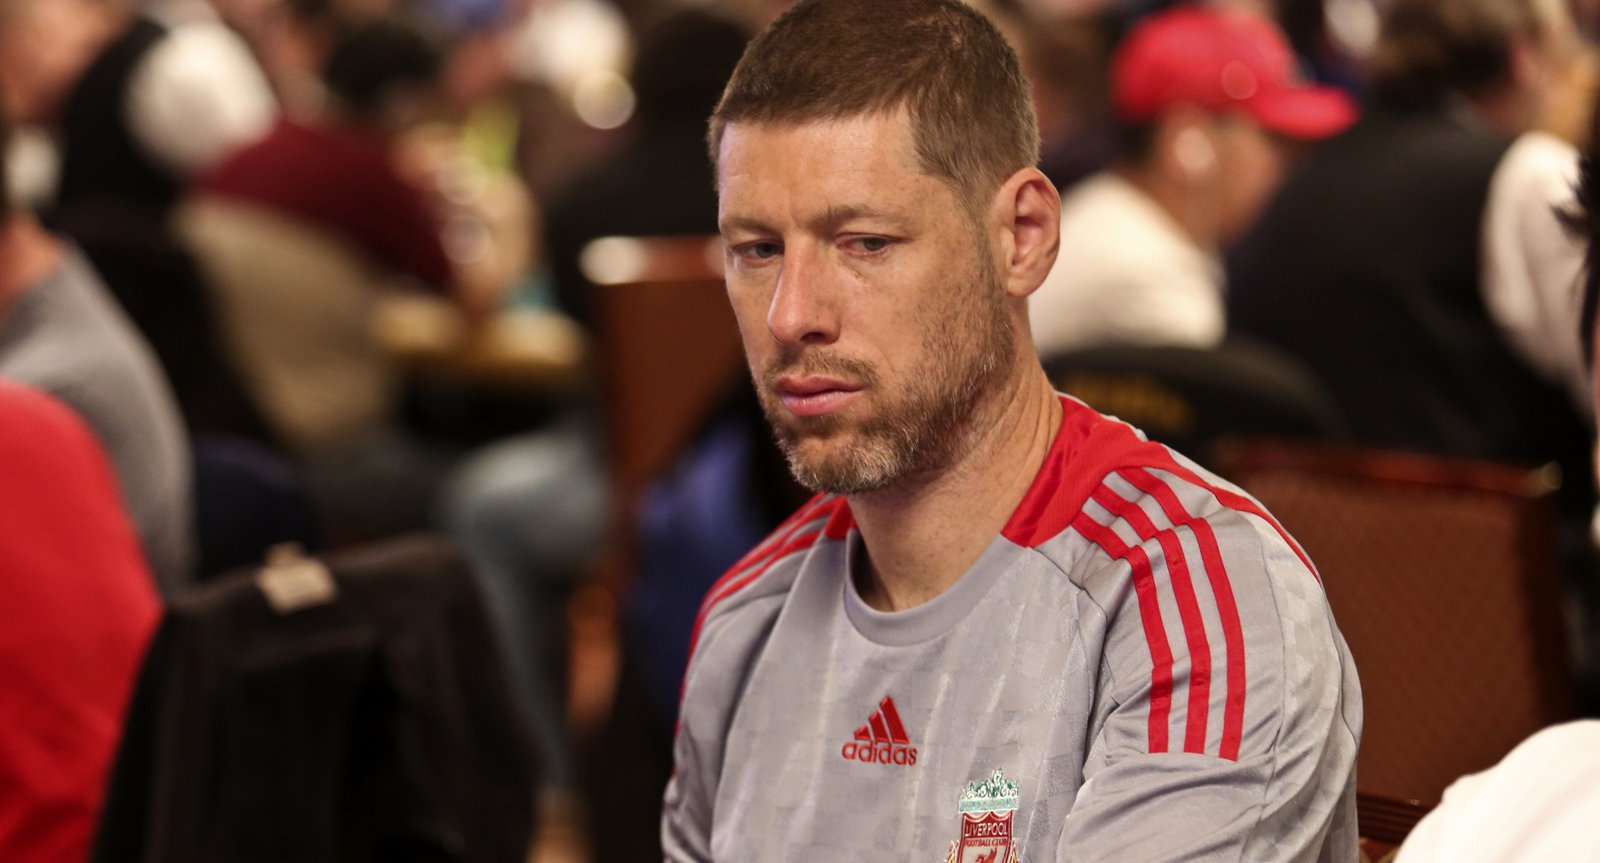 Huck Seed Chosen as 2020 Inductee to Poker Hall of Fame